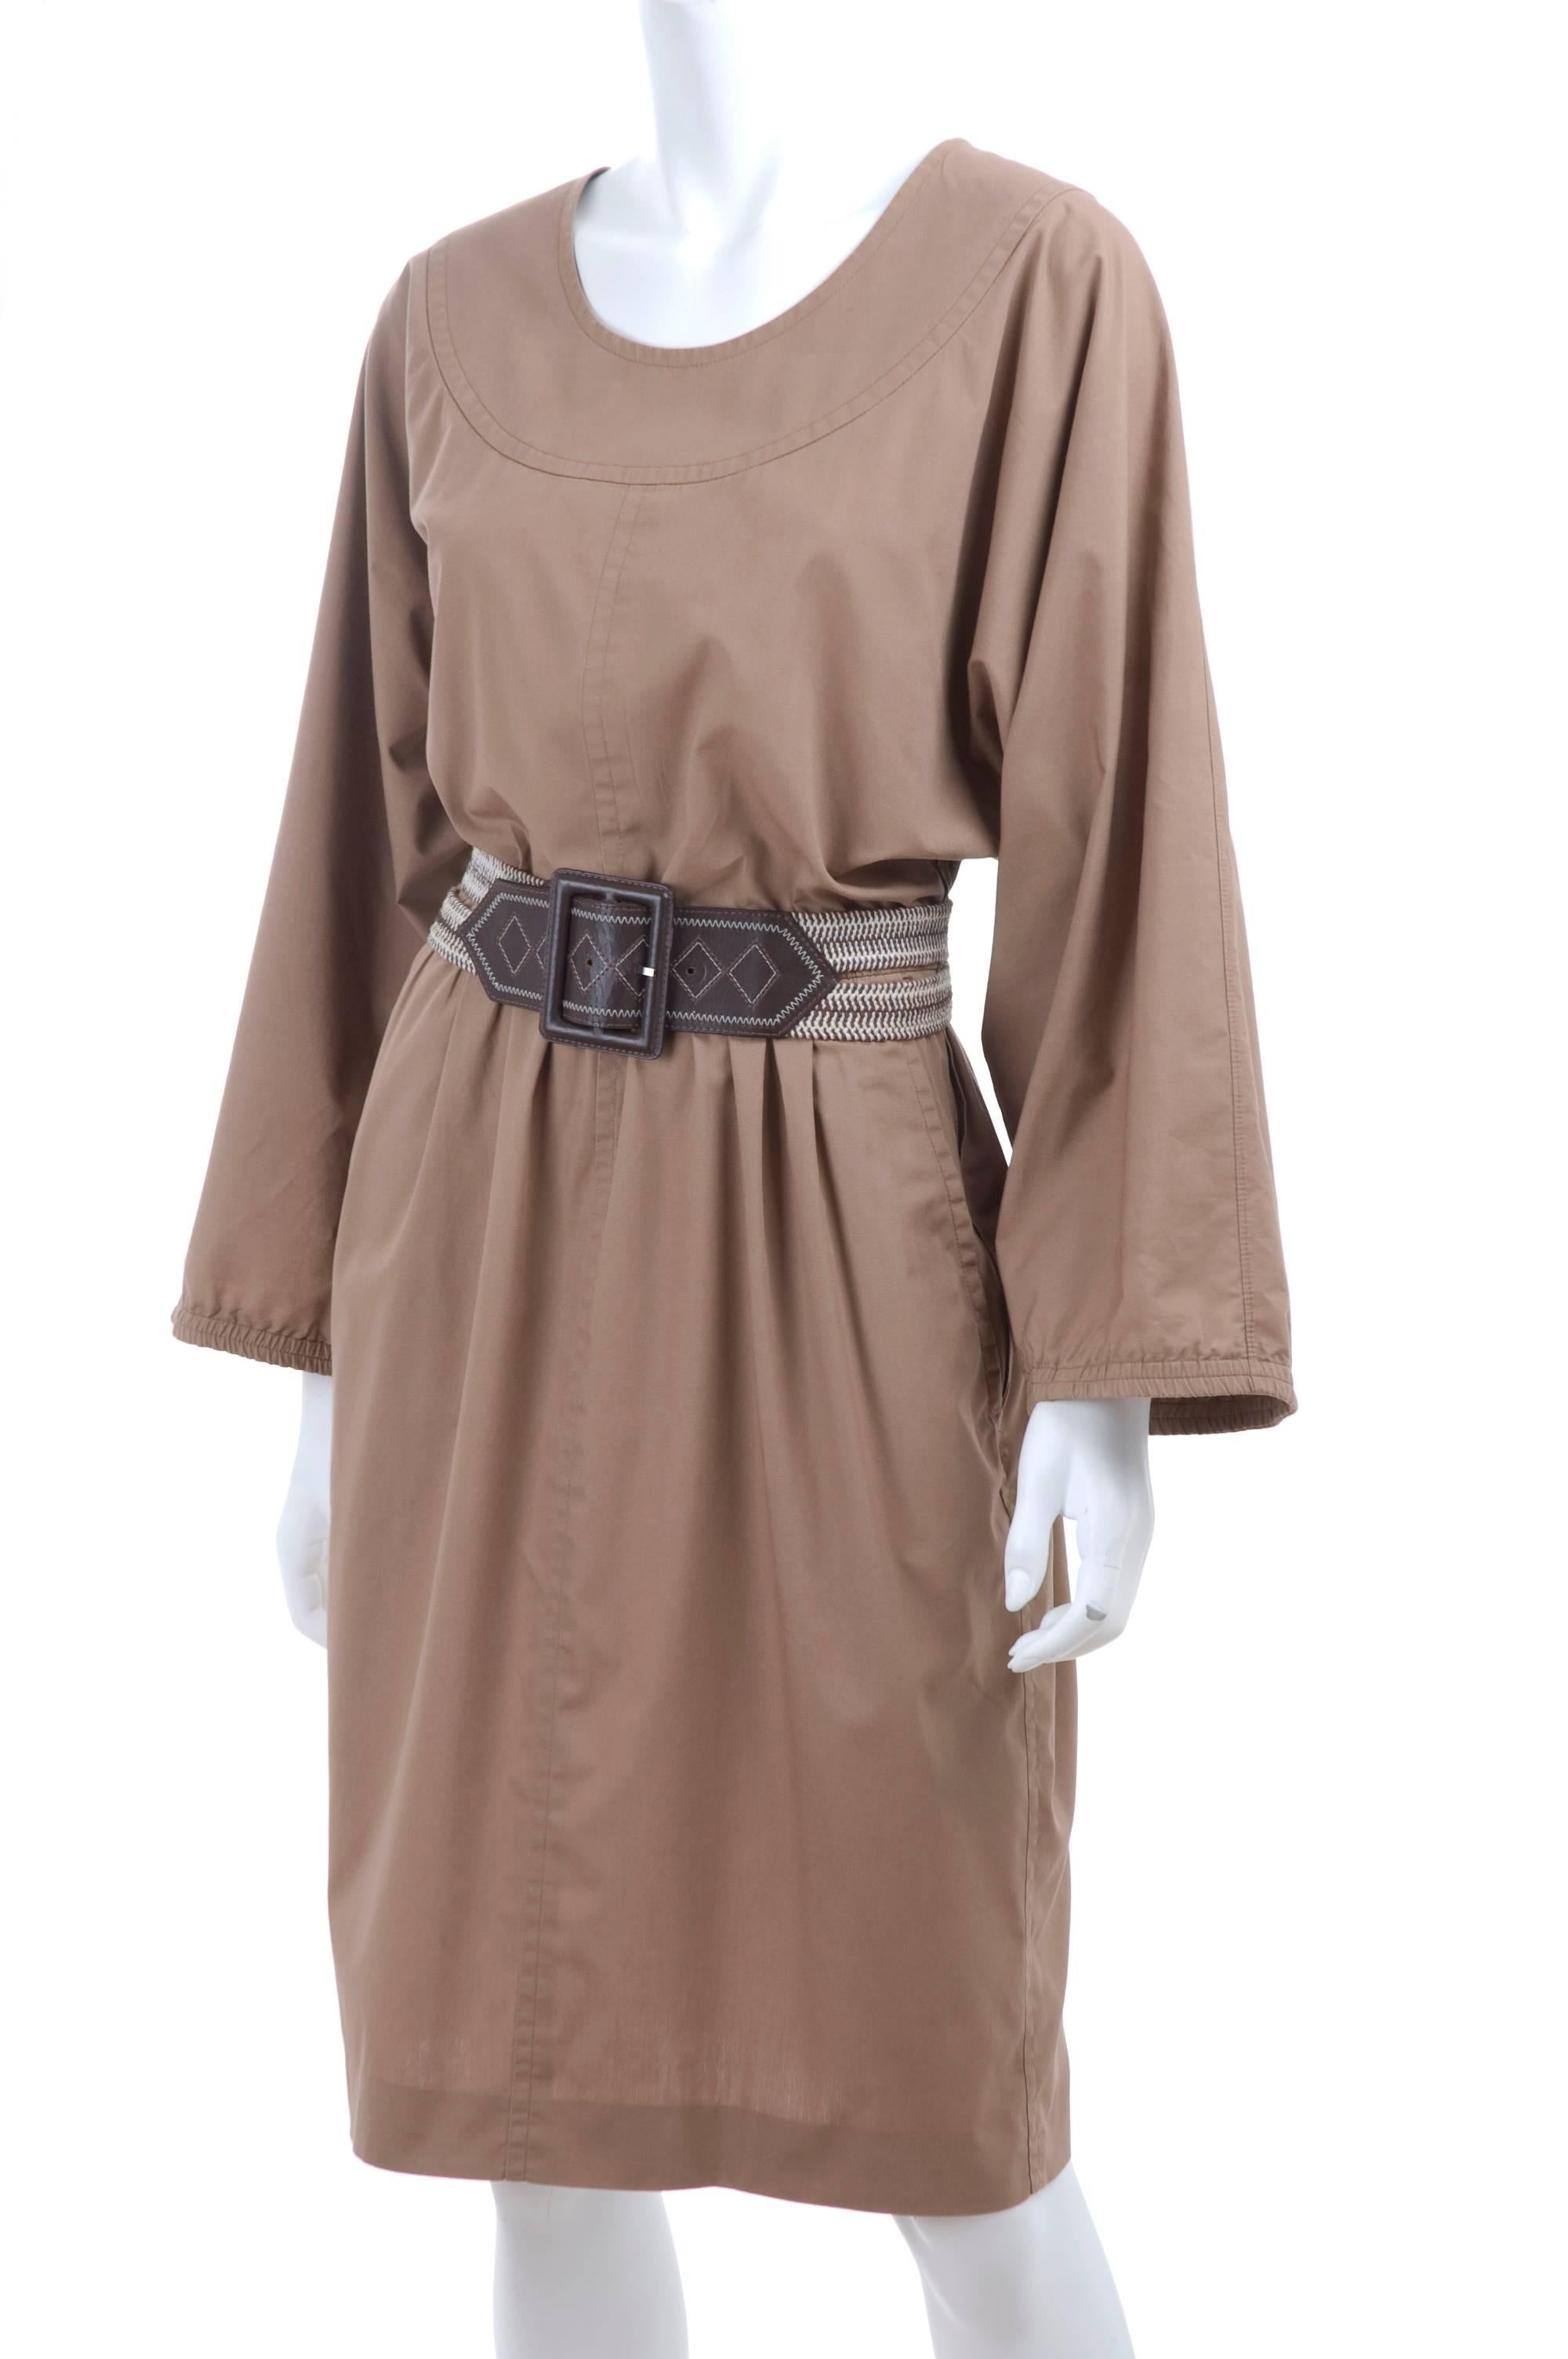 Vintage 80's Yves Saint Laurent cotton dress in light brown with a wonderful mtaching belt. 2 side pockets and big sleeves. The sleeves used to be elastic and the wrist, but for the moment I think it's nice to wear them open. If you prefer a tider